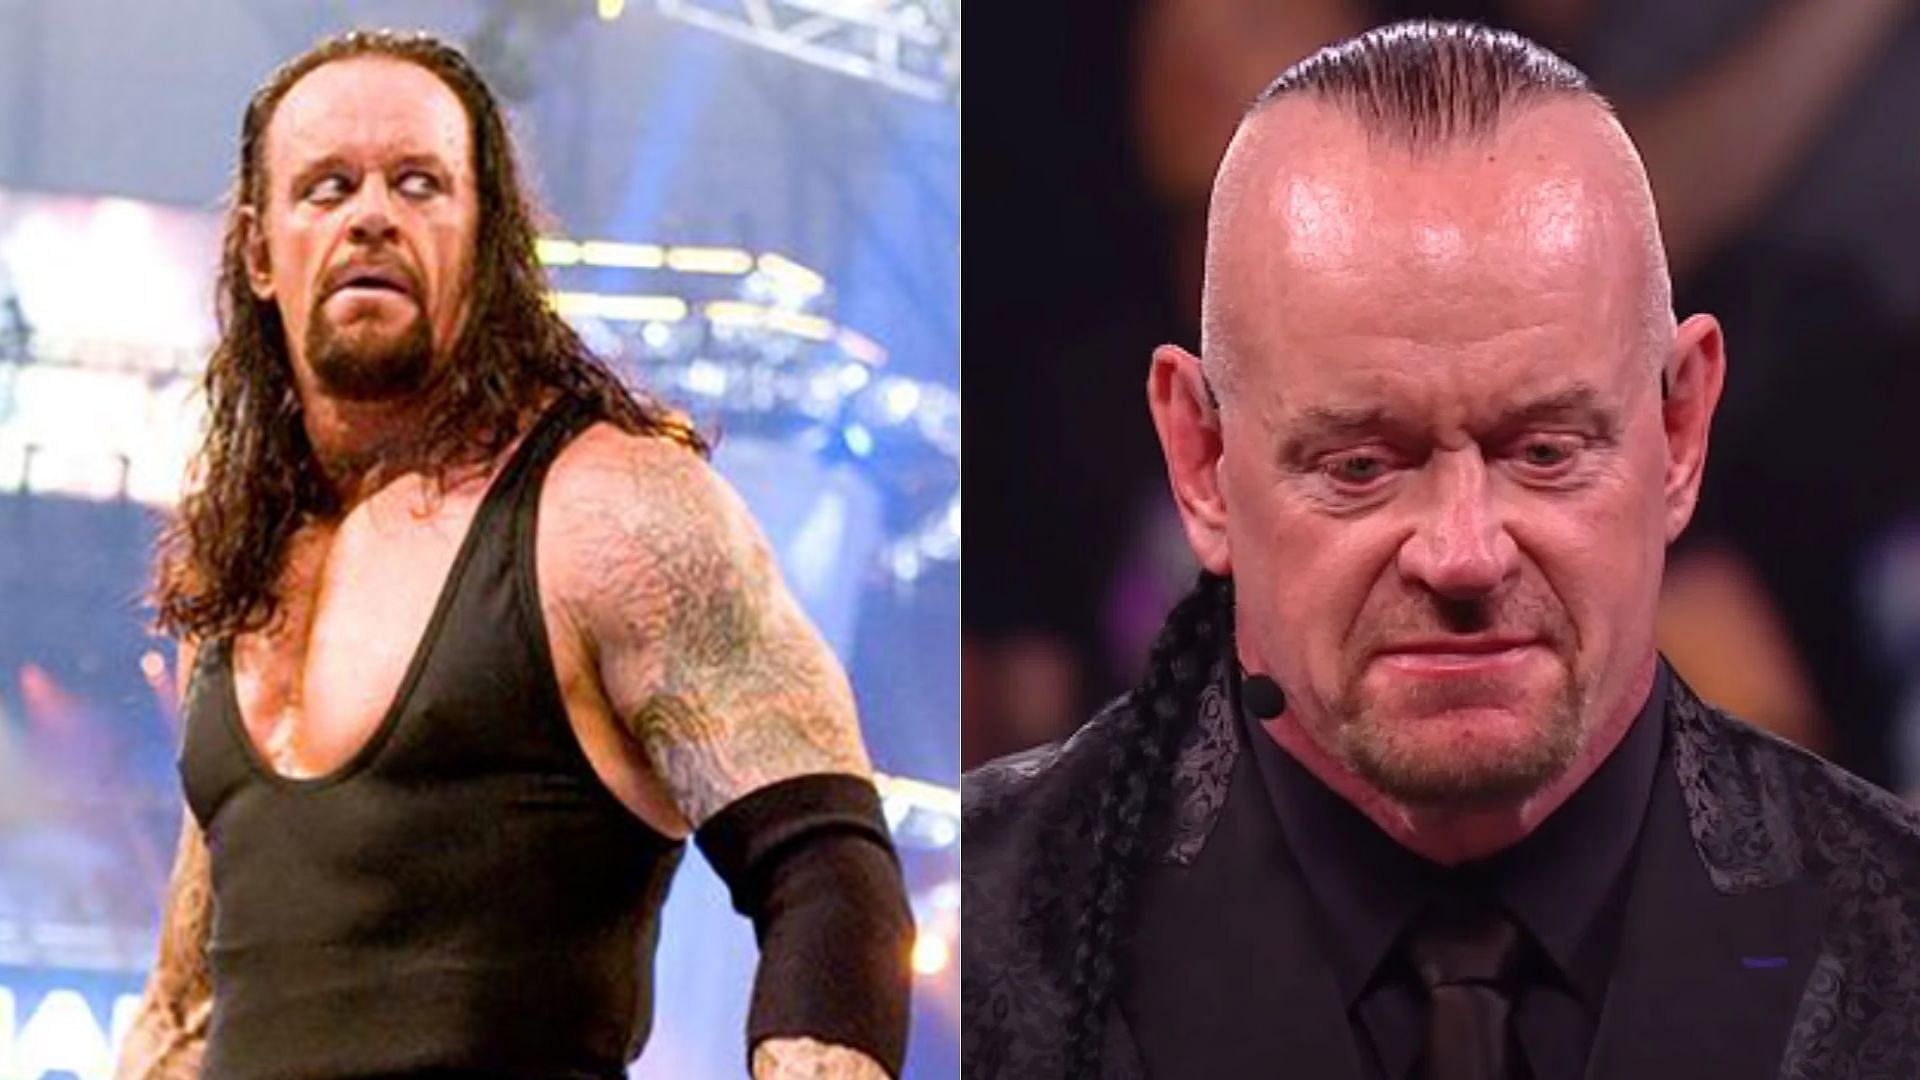 The Undertaker is one of the most successful WWE characters of all-time